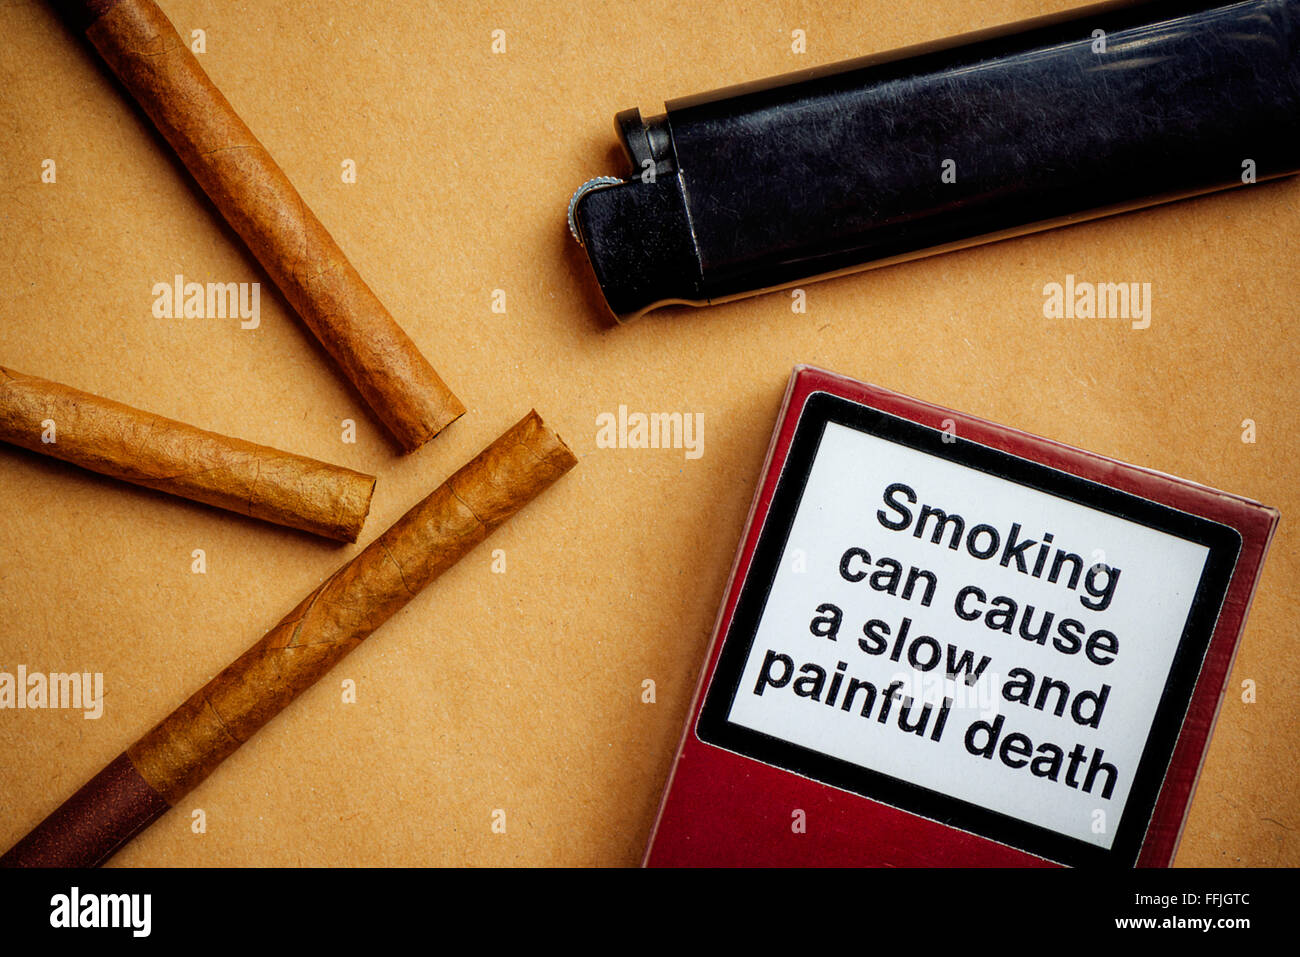 Smoking cigarettes addiction and health issue concept, flat lay arrangement, smoking can cause a slow and painful death generic Stock Photo